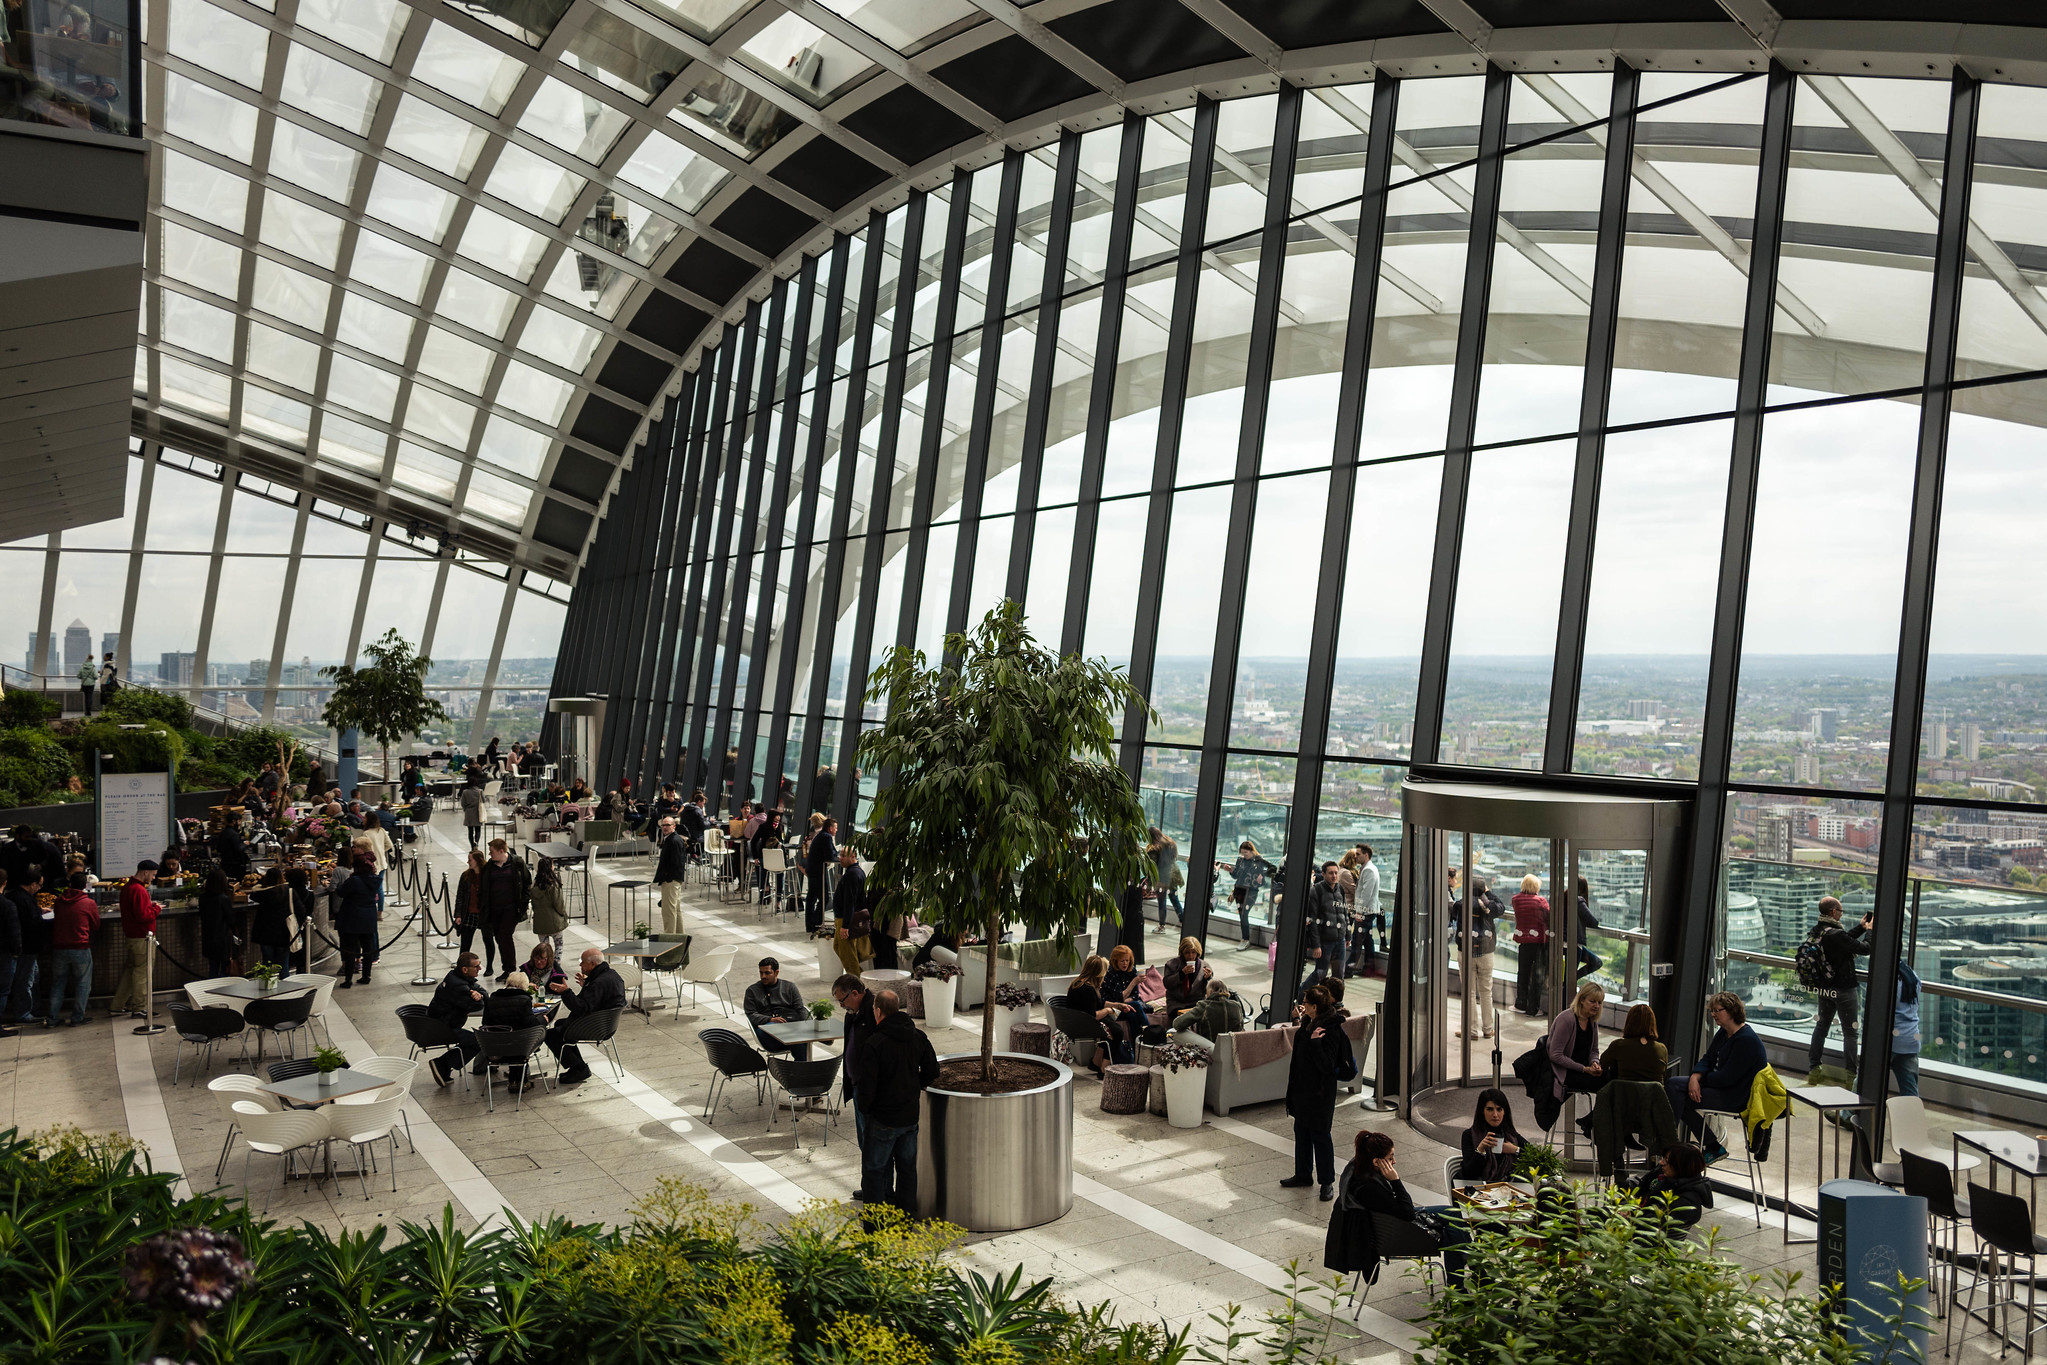 <p>Some visitors have also said that <strong>they preferred the Sky Garden</strong> over the London Eye. Not only is it free of charge, but it apparently offers a better view of the skyline.</p>